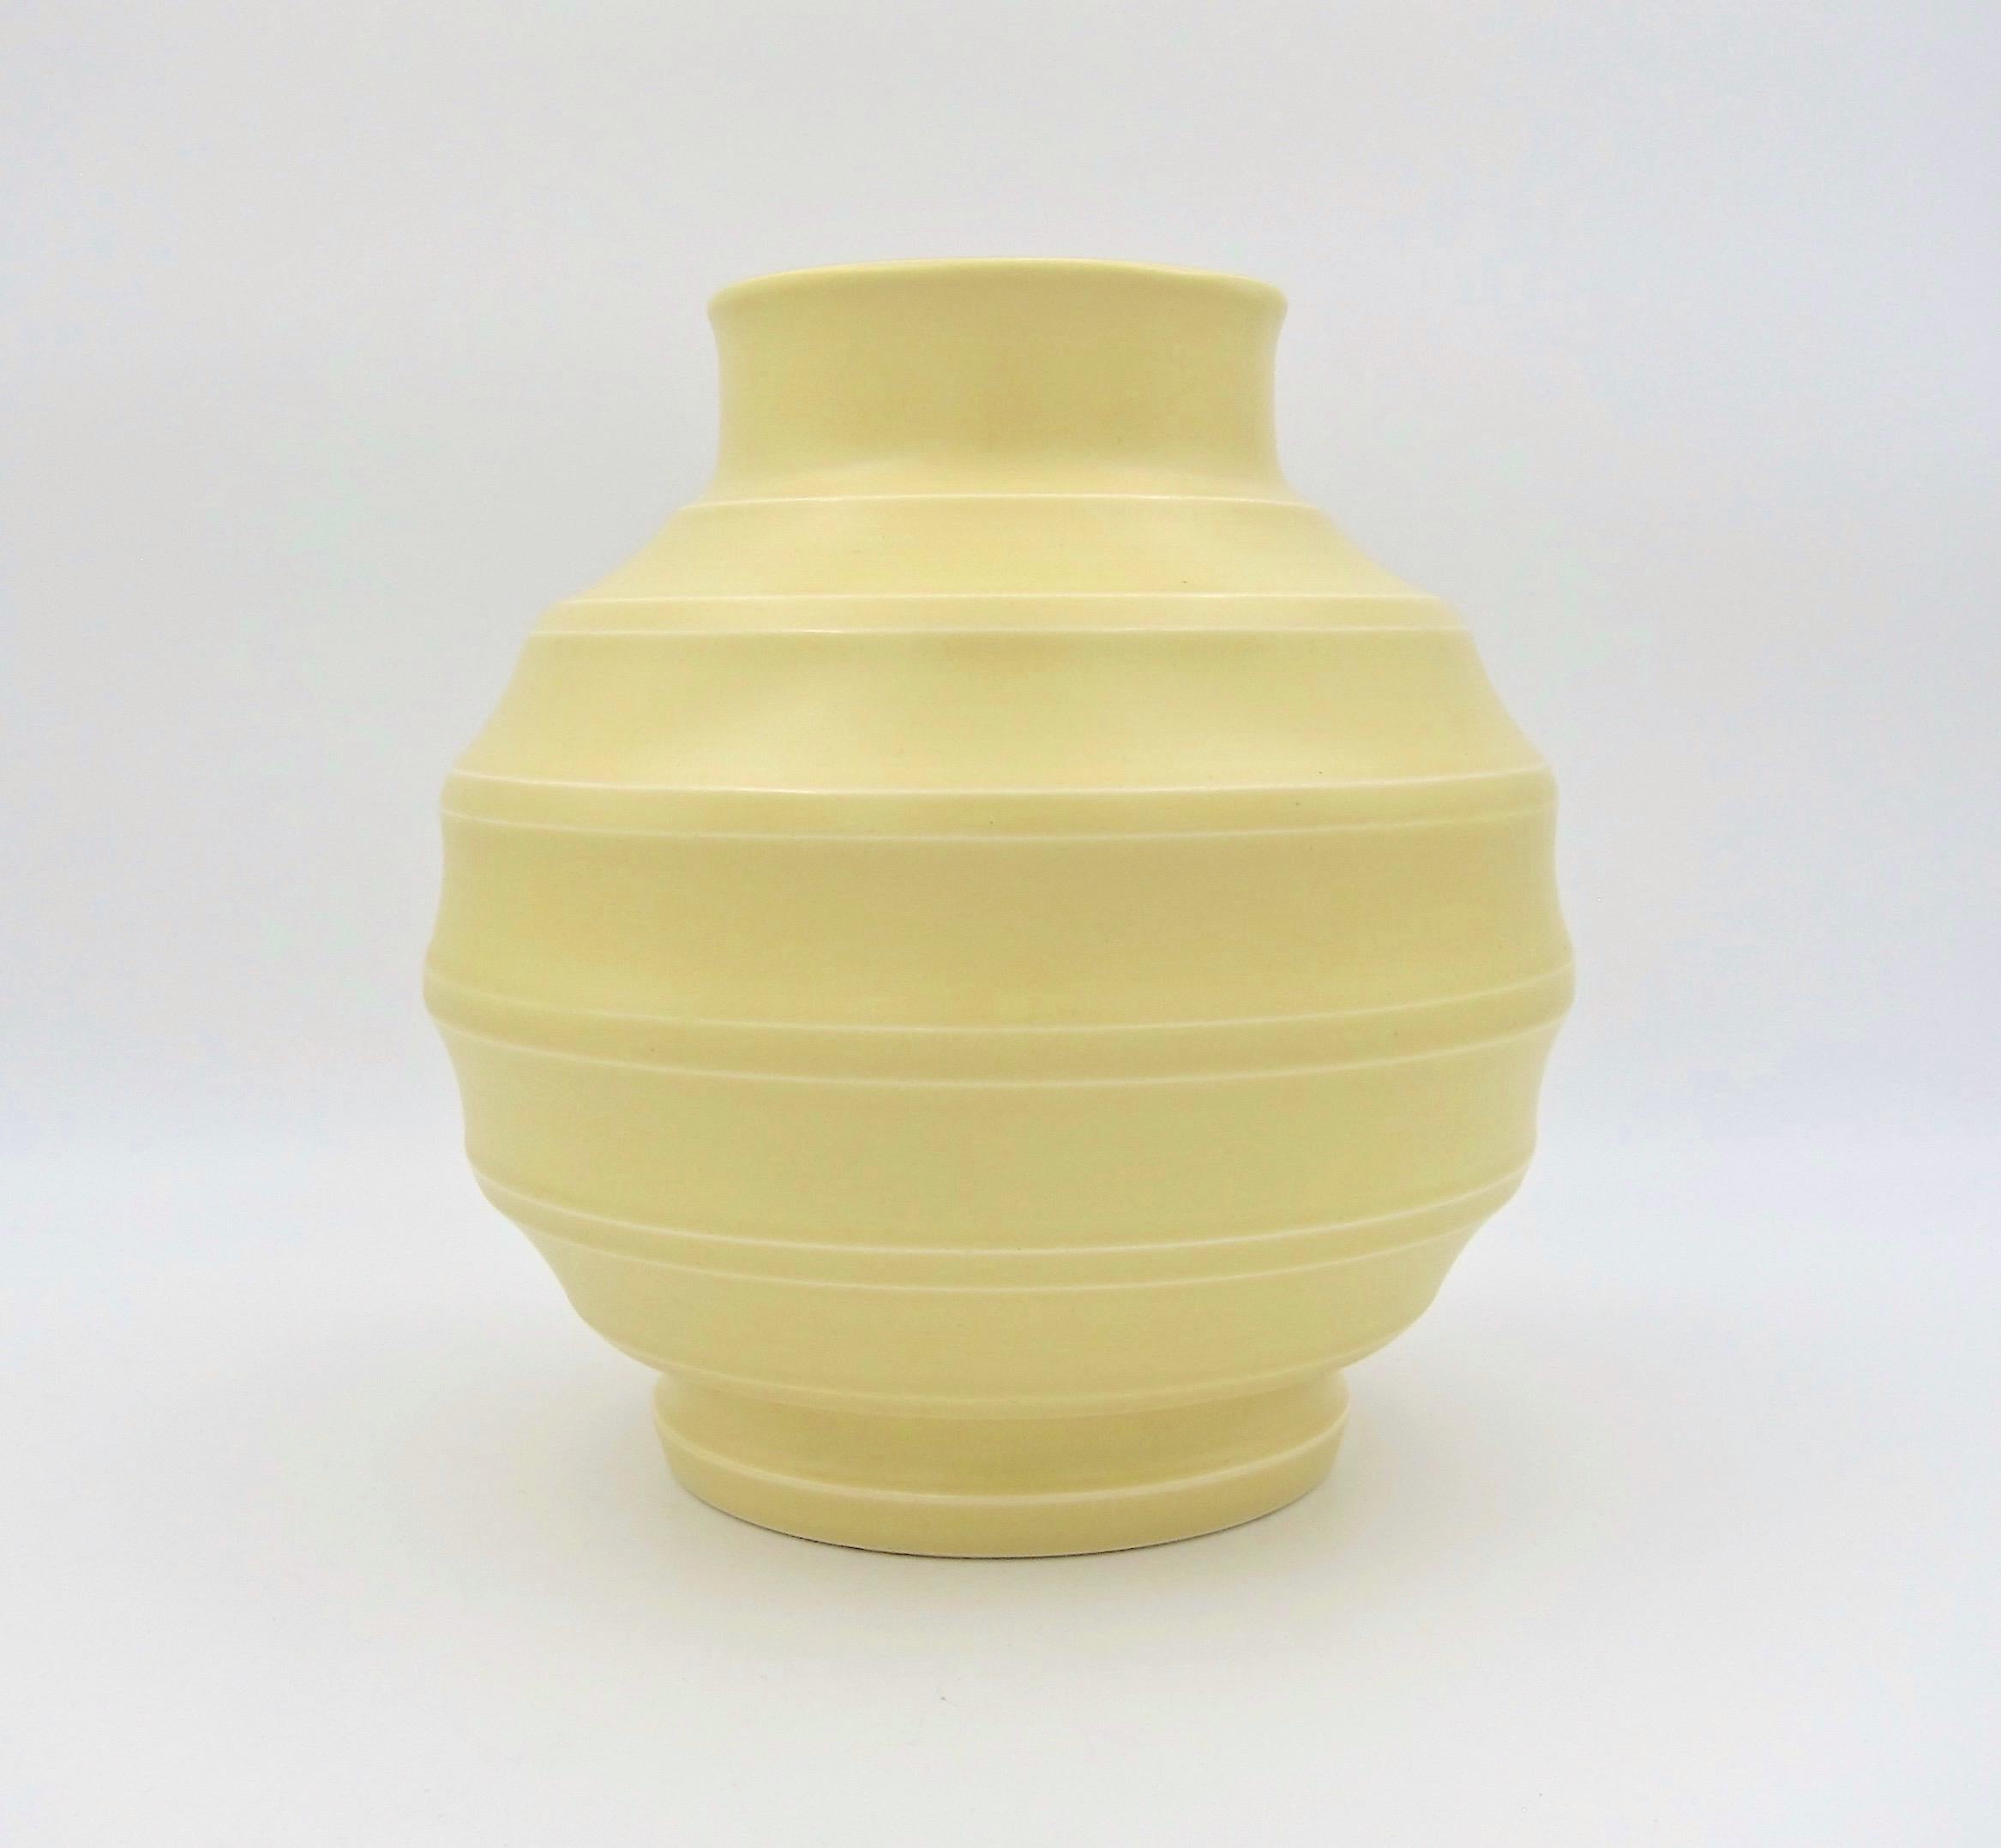 A spherical Art Deco vase by New Zealand born architect, potter, and designer, Keith Murray (1892-1981) for Wedgwood of England, dating to the 1930s. Murray designed this vase in 1932 and his printed signature appeared on the base until